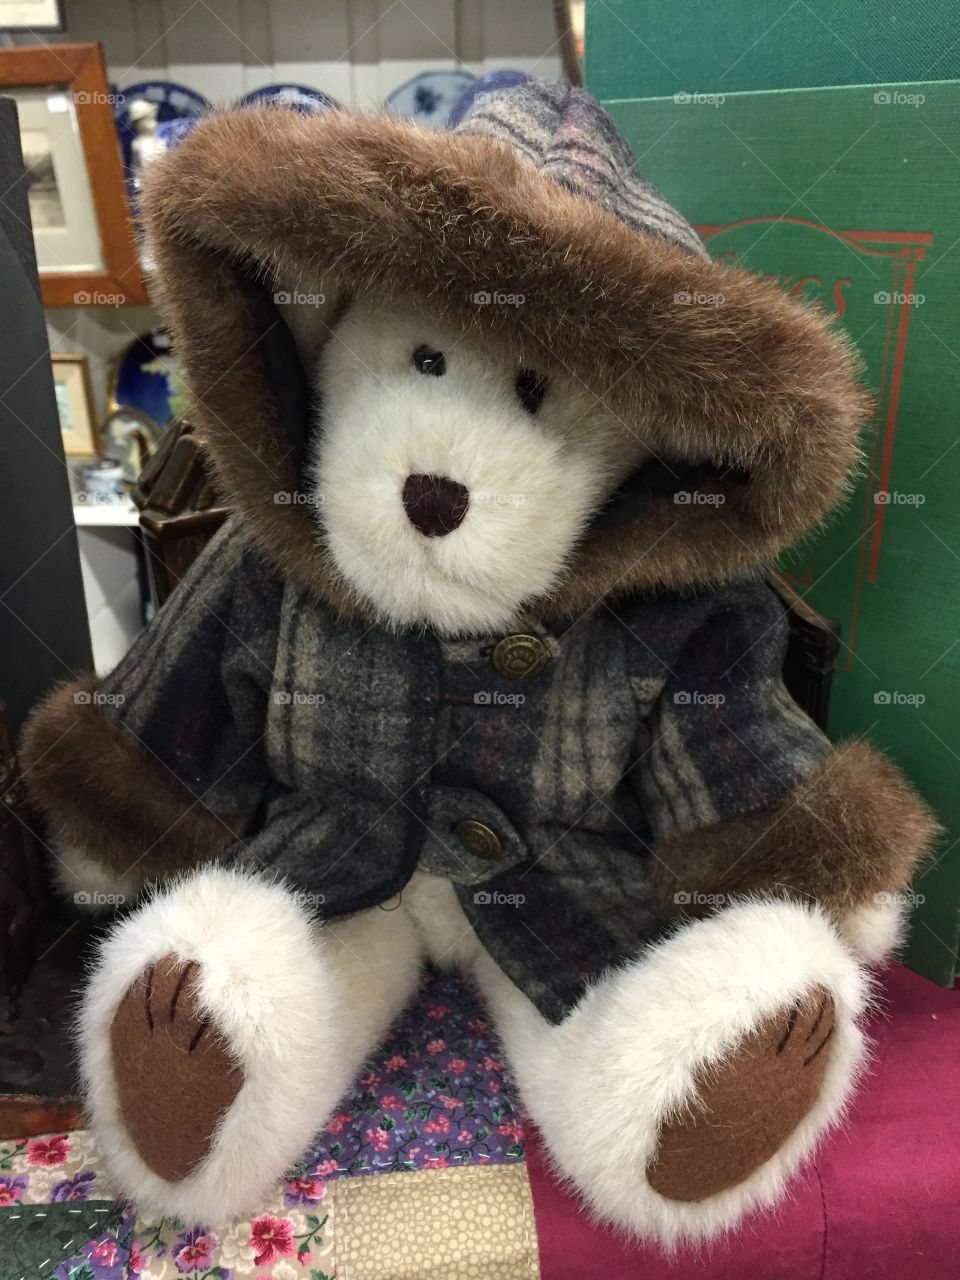 Bear with coat and hood